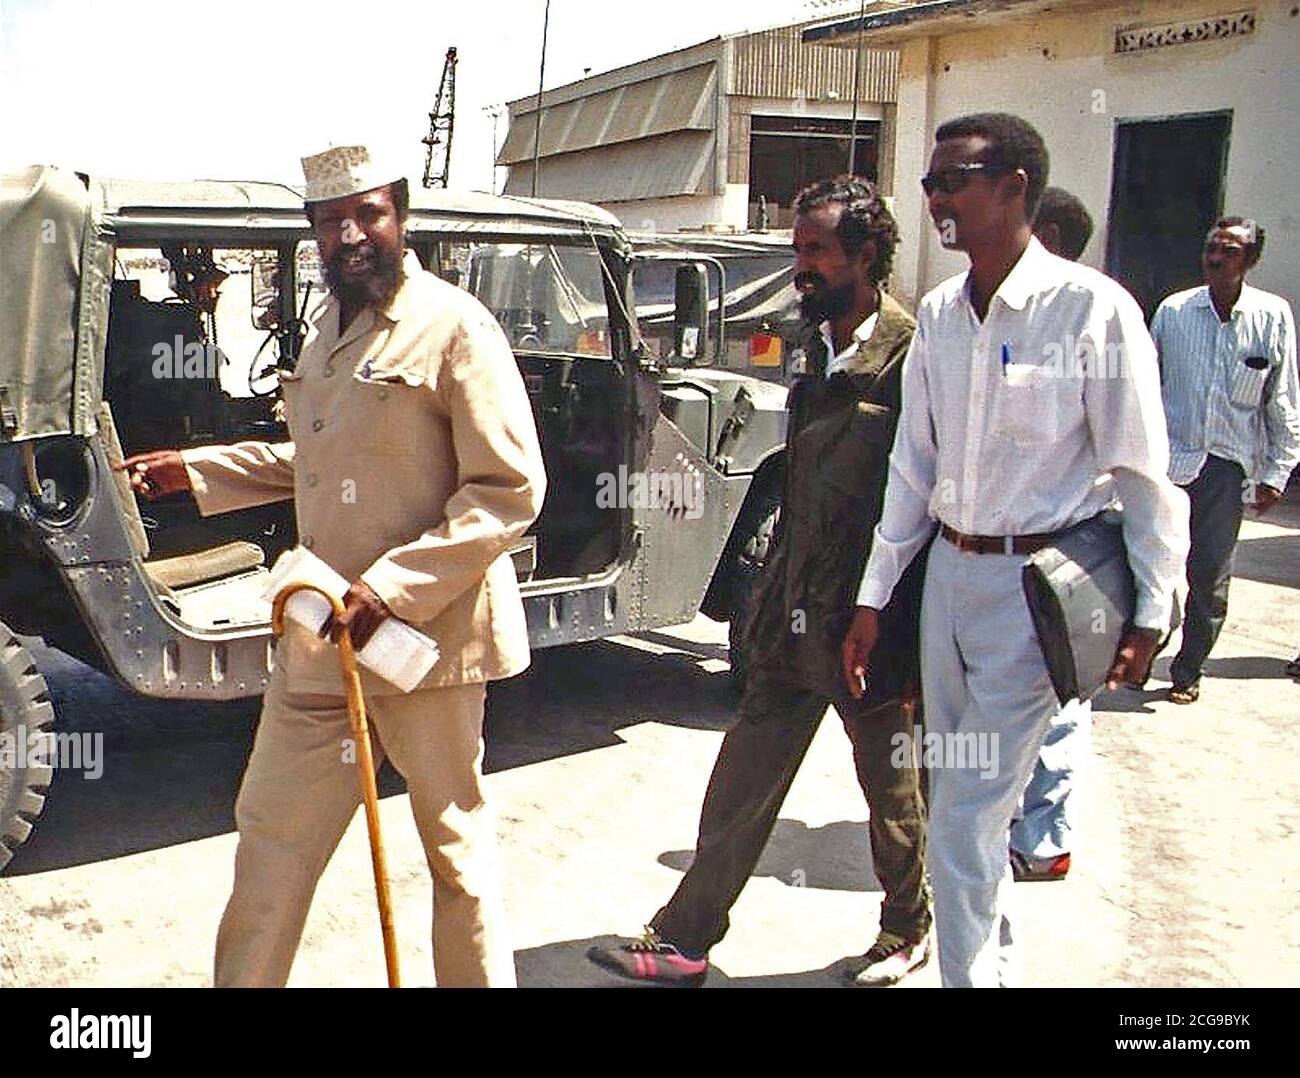 1992 - Straight on shot of Somali Faction Leader COL Jess, at left with hat and cane, walking outside the Joint Task Force Headquarters in Kismayo, Somalia with his entourage.  He had just completed a meeting with BGEN Lawson Magruder, USA, Joint Task Force Commander in Kismayo.  BGEN Magruder, (not shown) is from the 10th Mountain Division Fort Drum, New York.  This mission is in direct support of Operation Restore Hope. Stock Photo